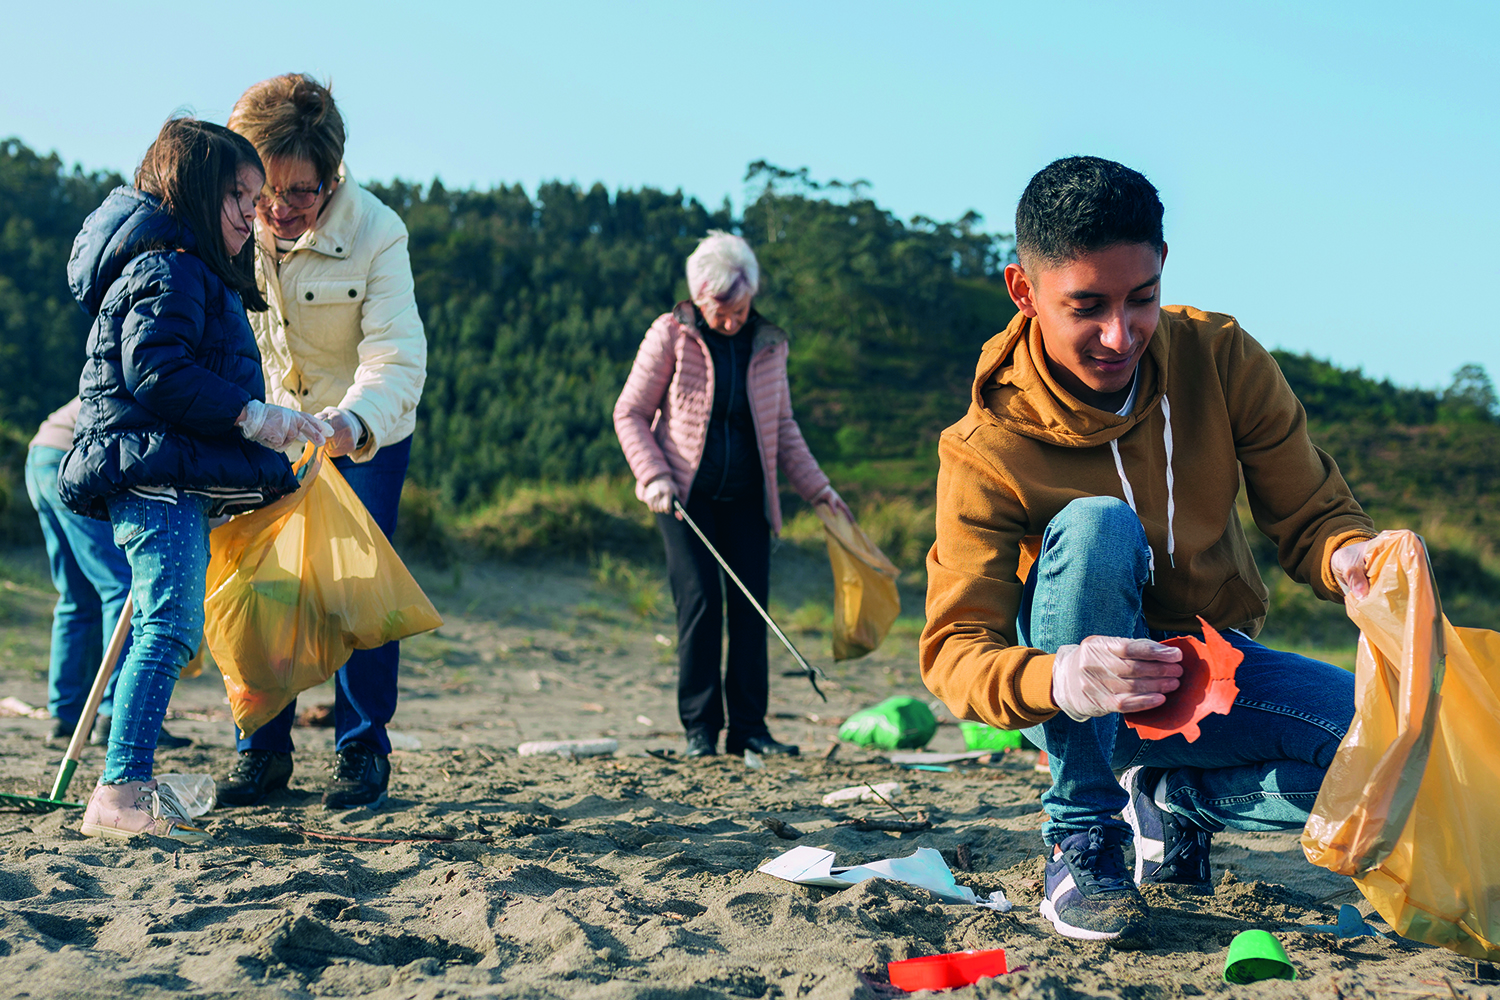 close-up of young person on beach putting litter in a rubbish bag, older woman behind with litter picker and stick. Second pic: woman volunteer handing donations to older woman.